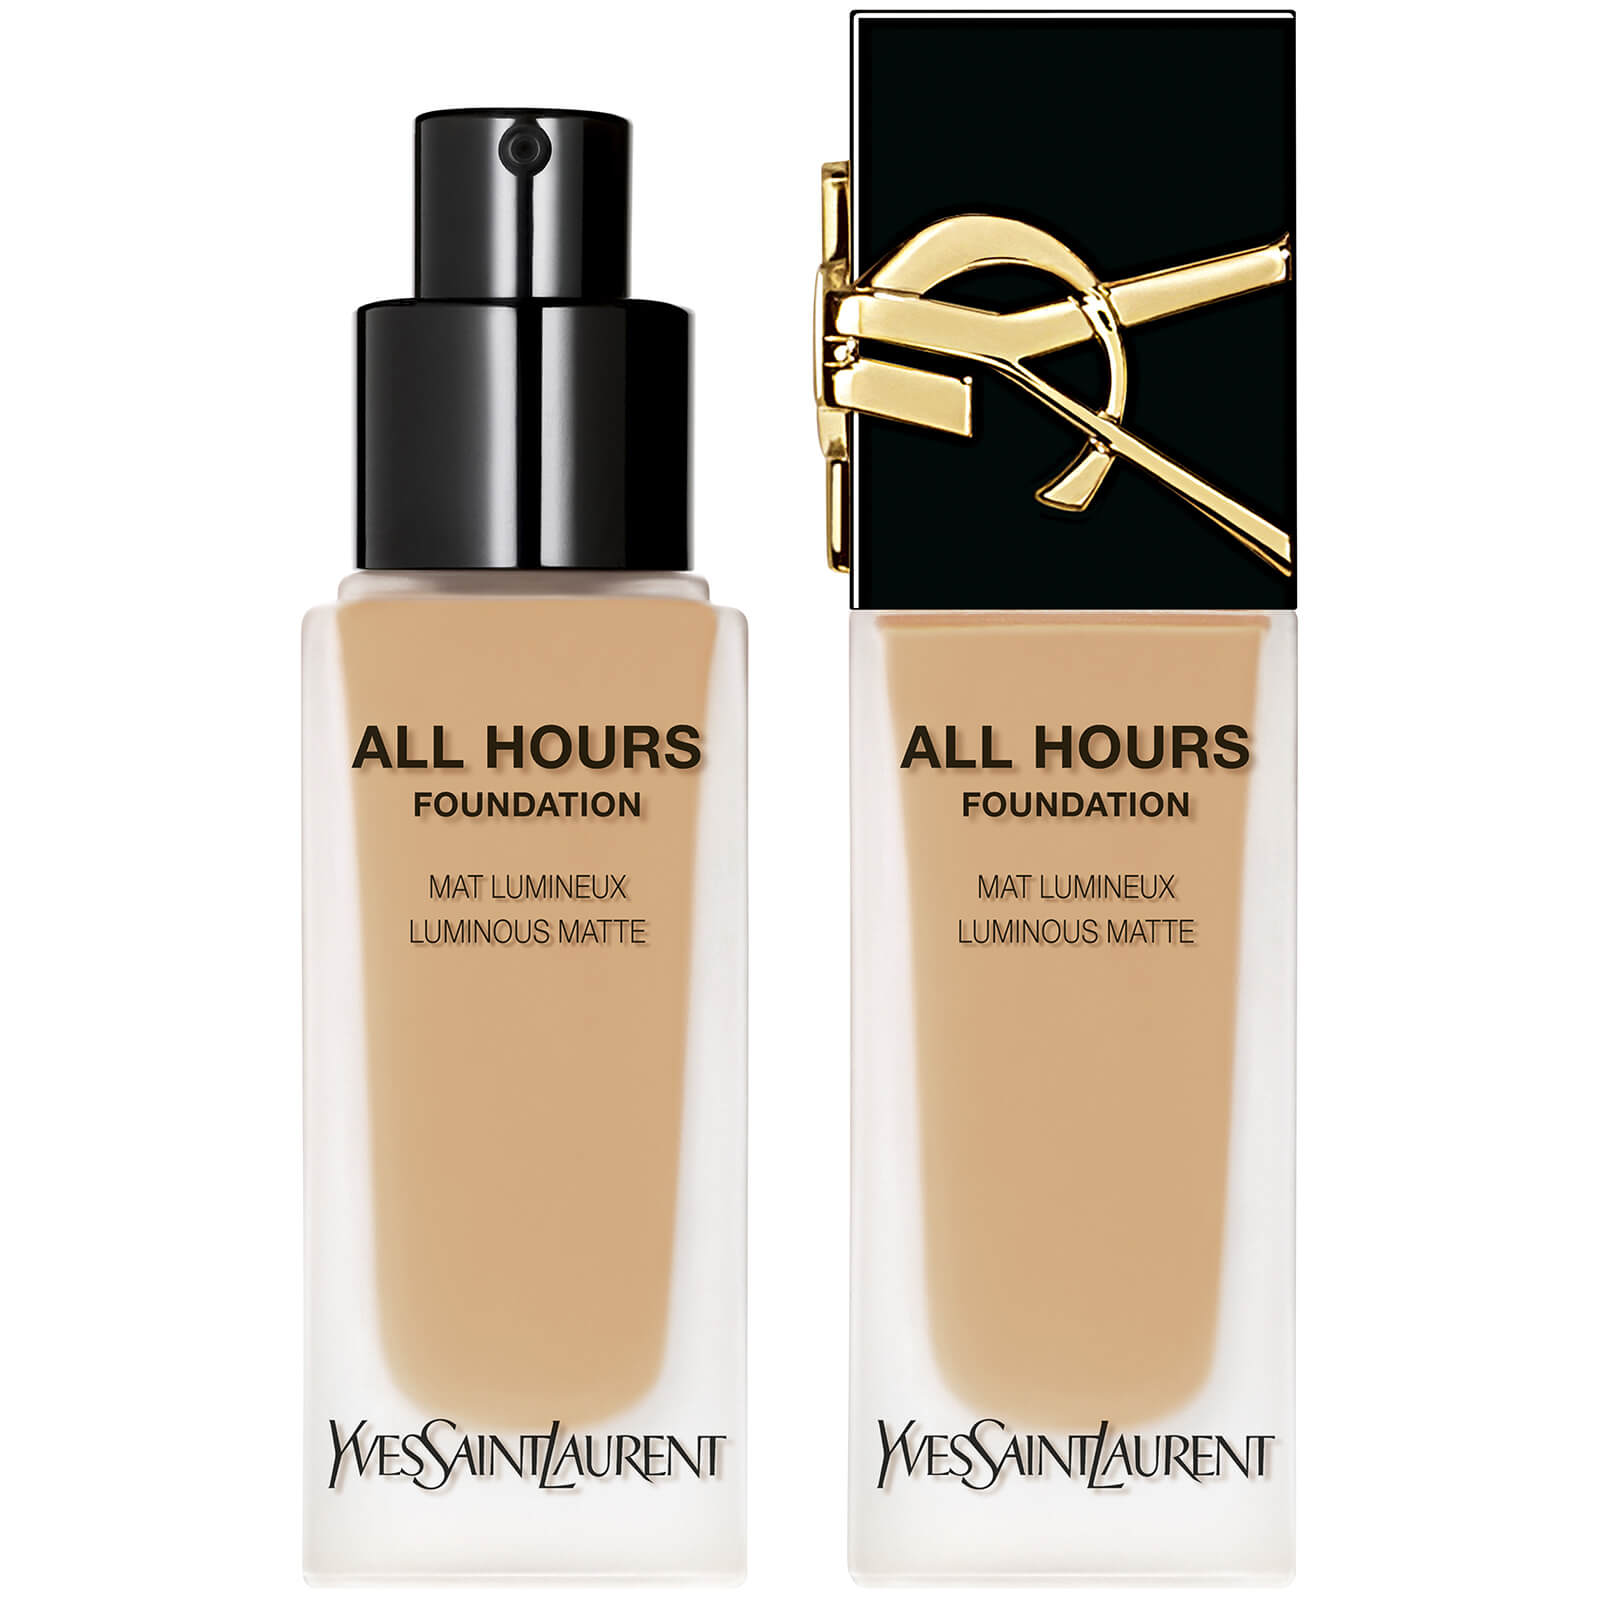 Yves Saint Laurent All Hours Luminous Matte Foundation with SPF 39 25ml (Various Shades) - LW9